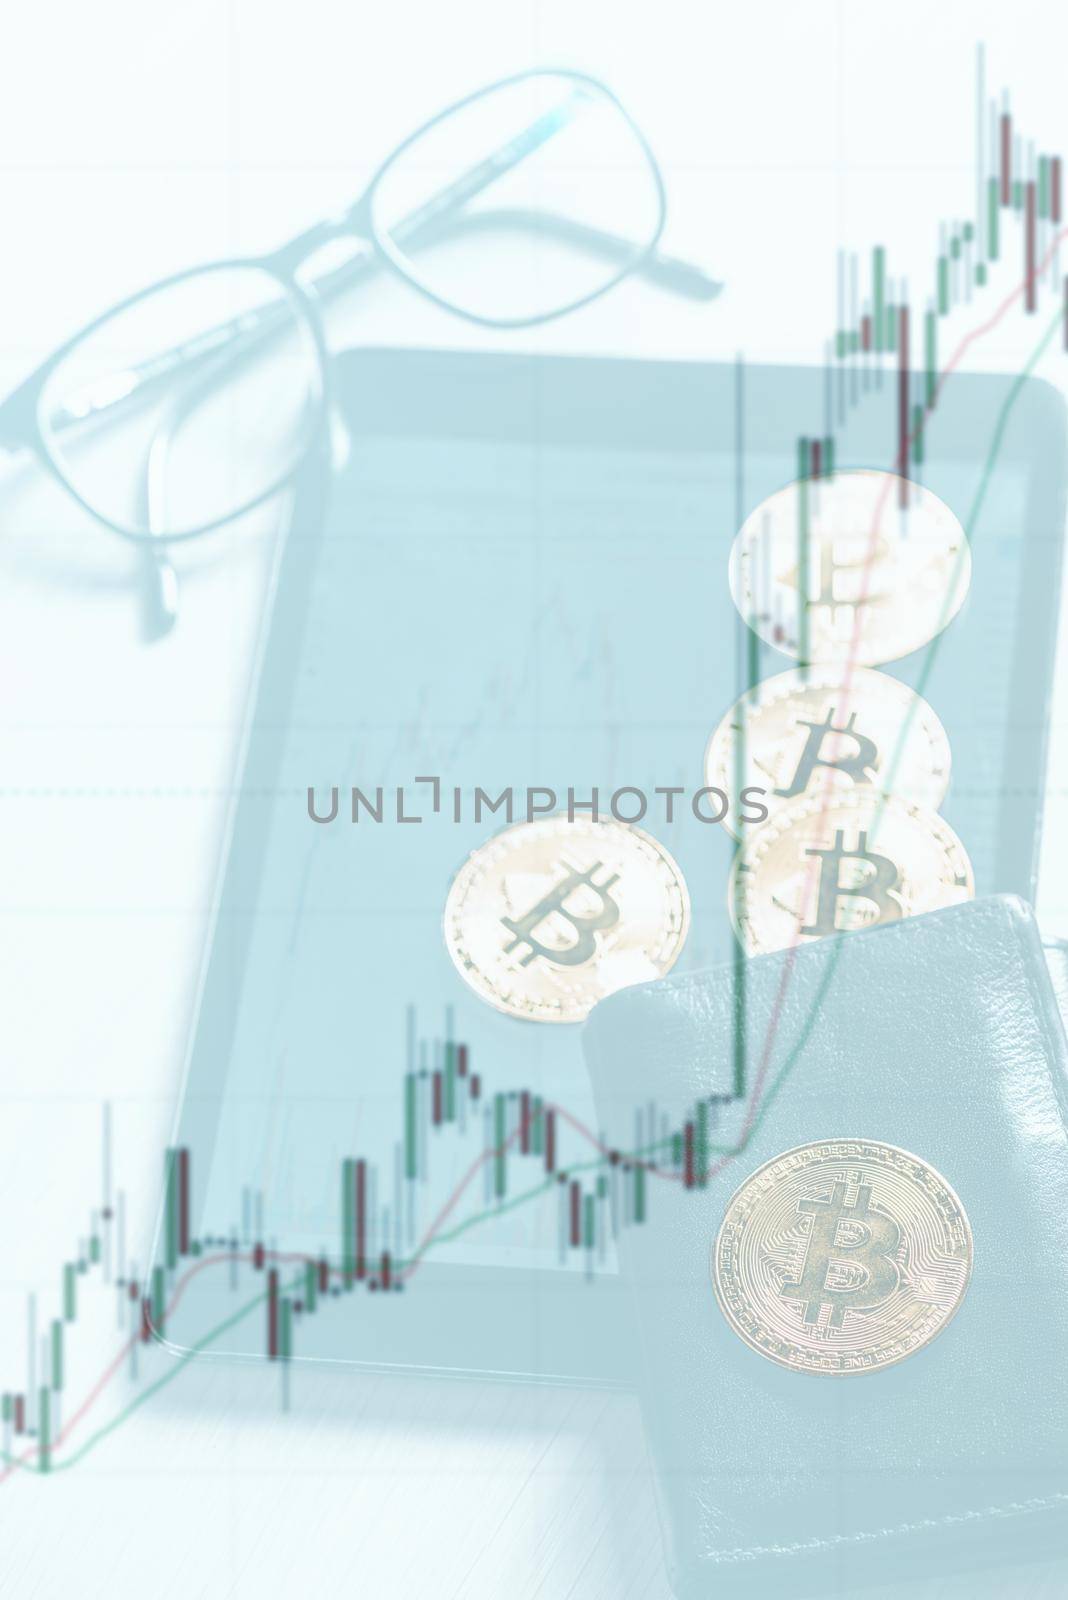 Double exposure of growth diagram with image of gold bitcoins on wallet and digital tablet near the glasses.